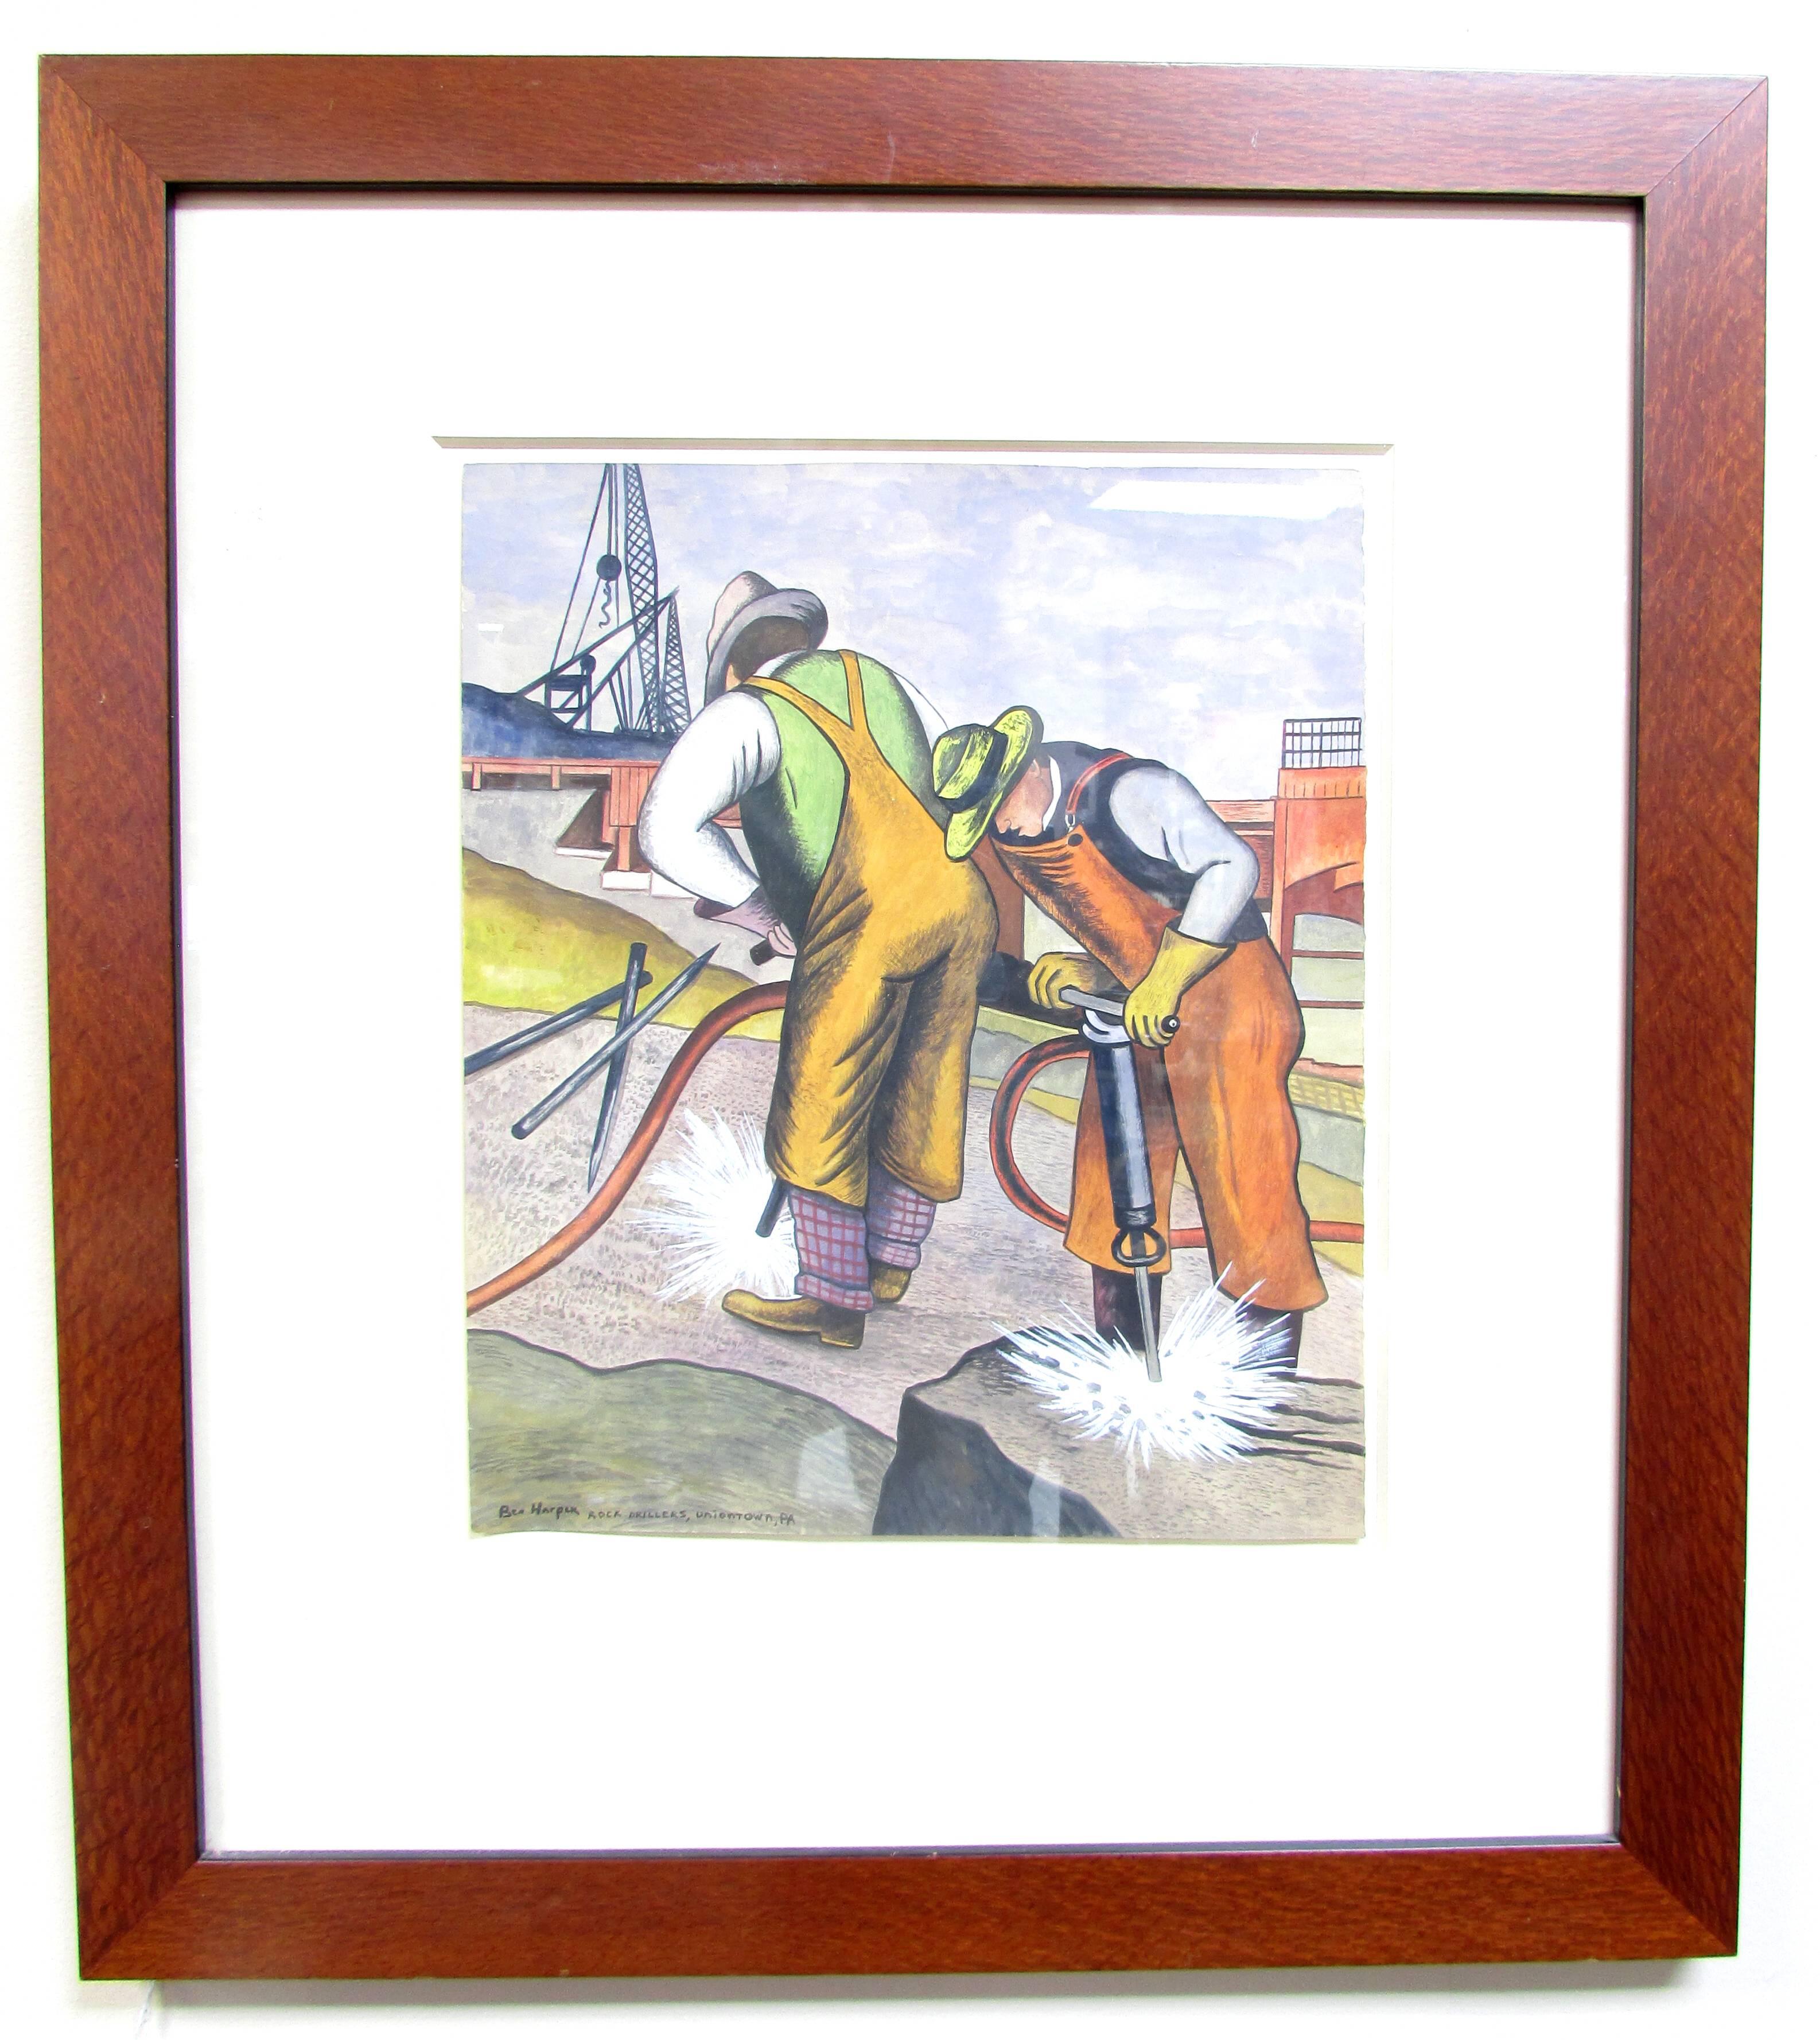 Small framed gouache of workers drilling with industrial background by artist Ben Harper painted in the 1940's WPA era and style more recent framing